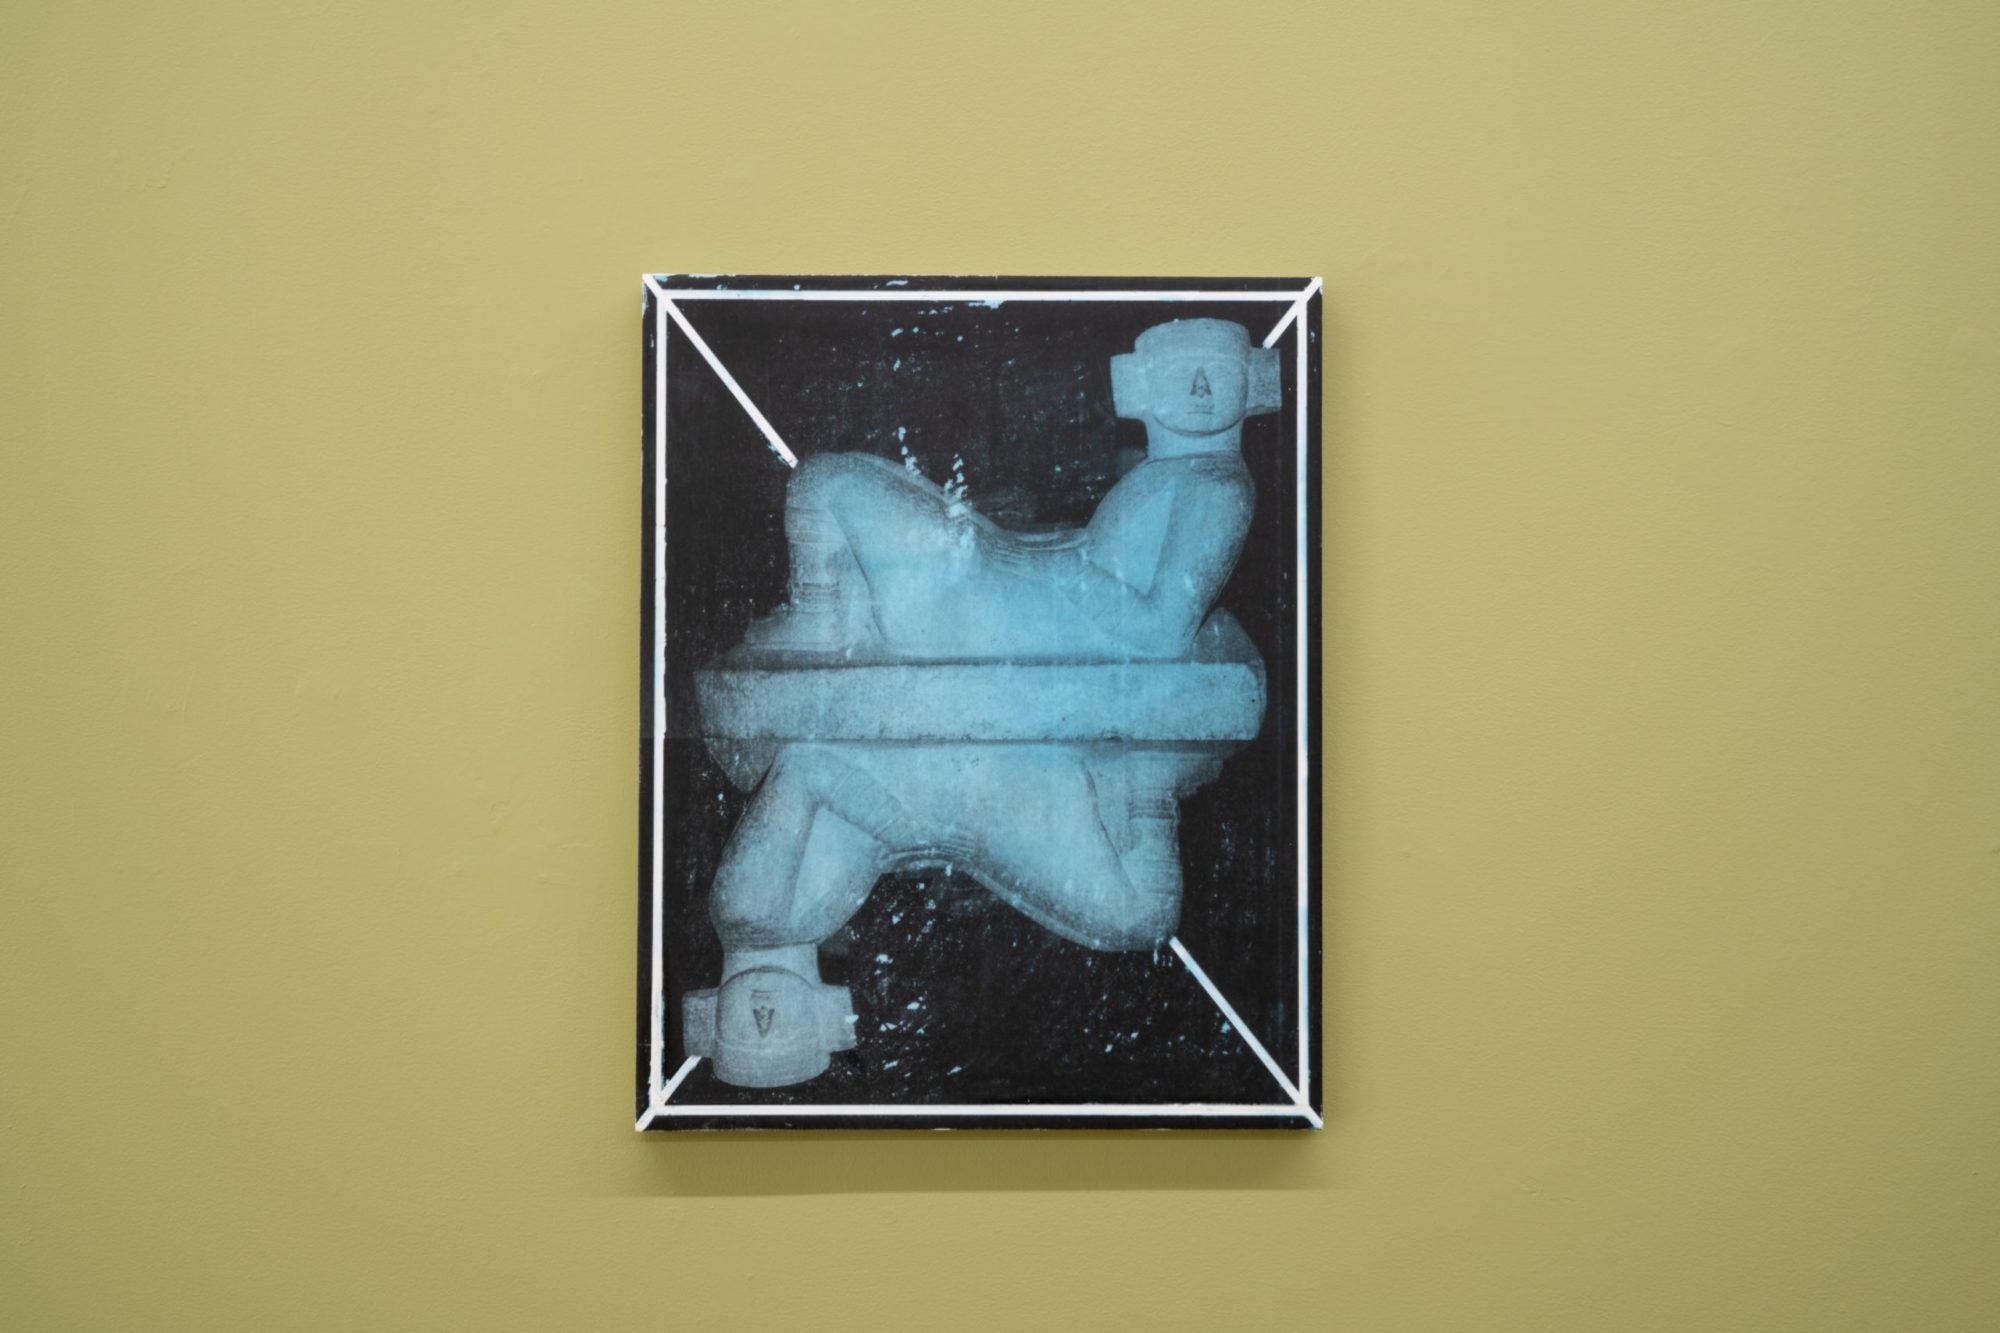 An image copied onto a wax panel which shows a sculpture that is reflected below, creating two images of the sculpture.